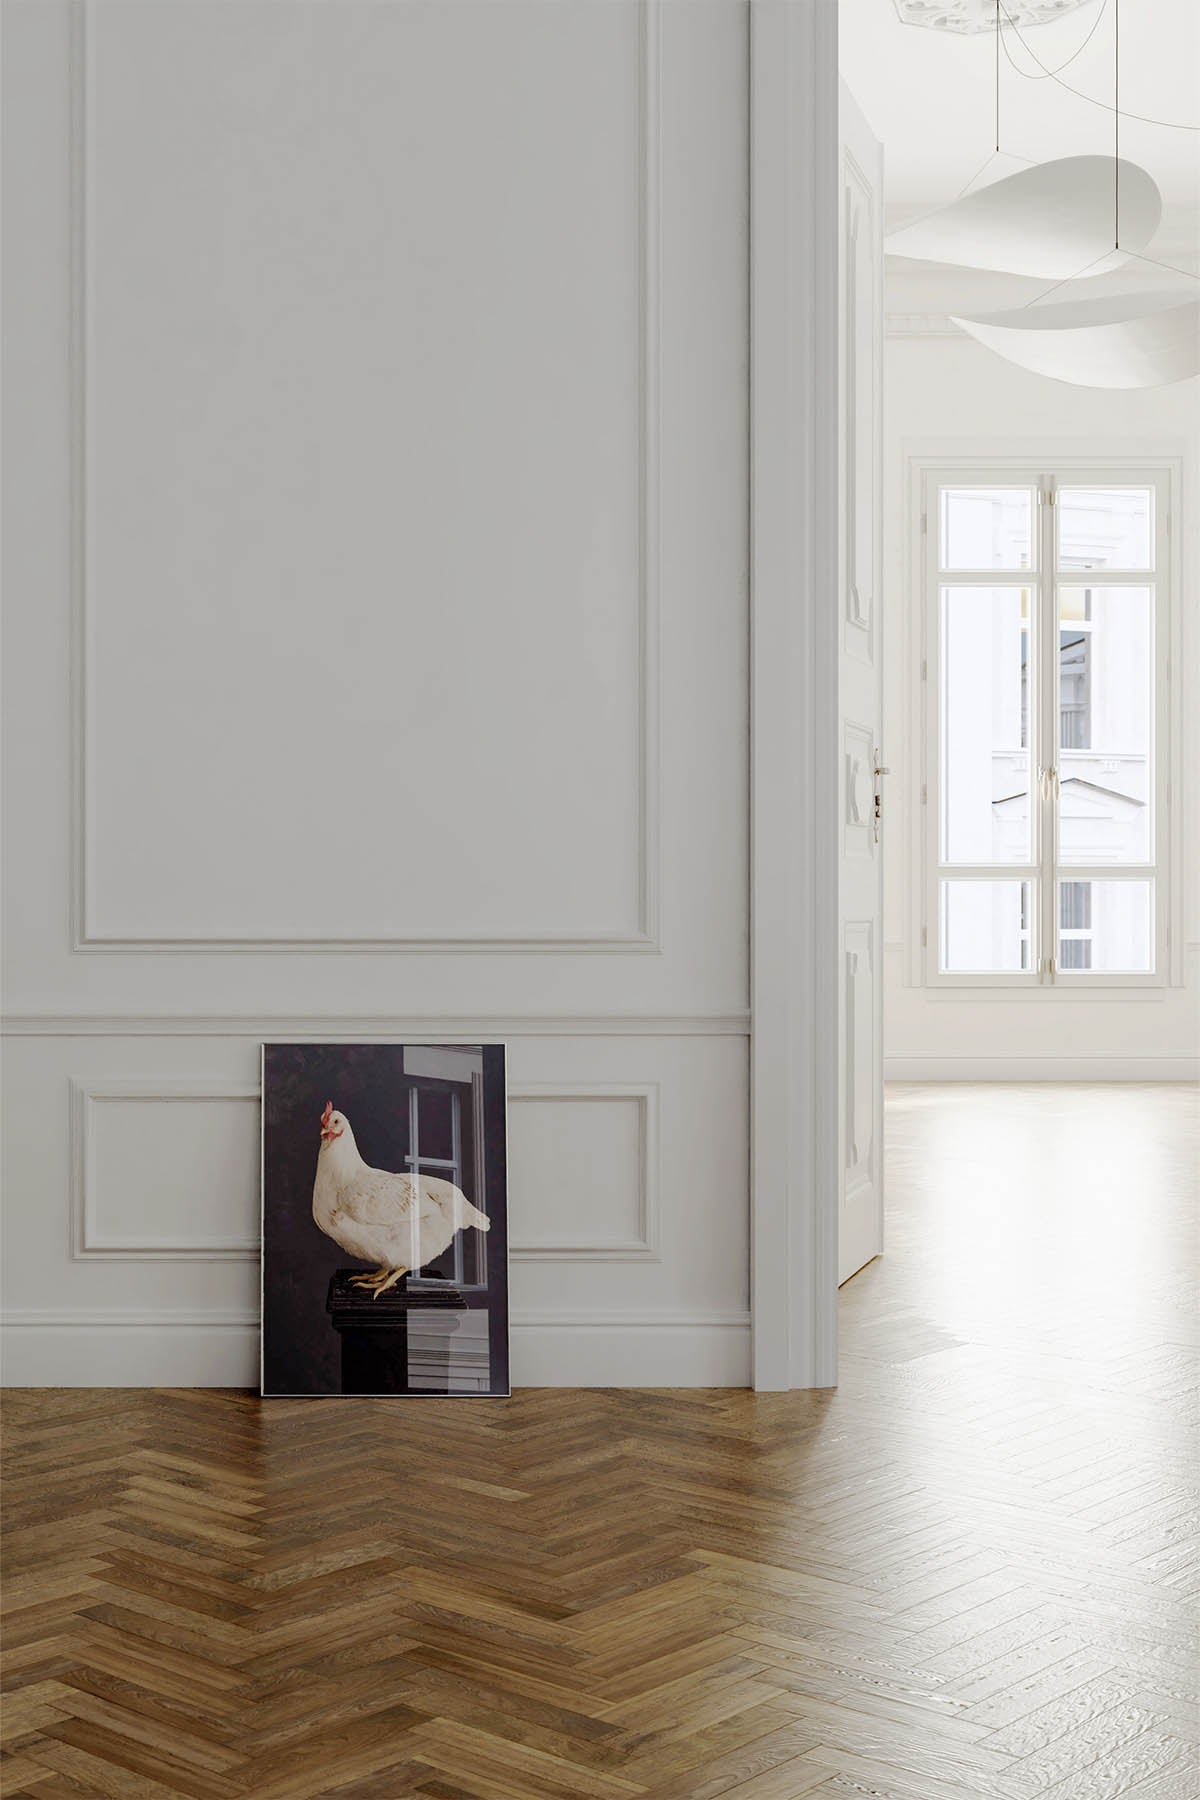 Fine Art Print Of A White Chicken Standing On A Black Plinth With A Black Background Framed On A Wall In An European Style Entry Way leaning against a wall sitting on european oak herringbone flooring.